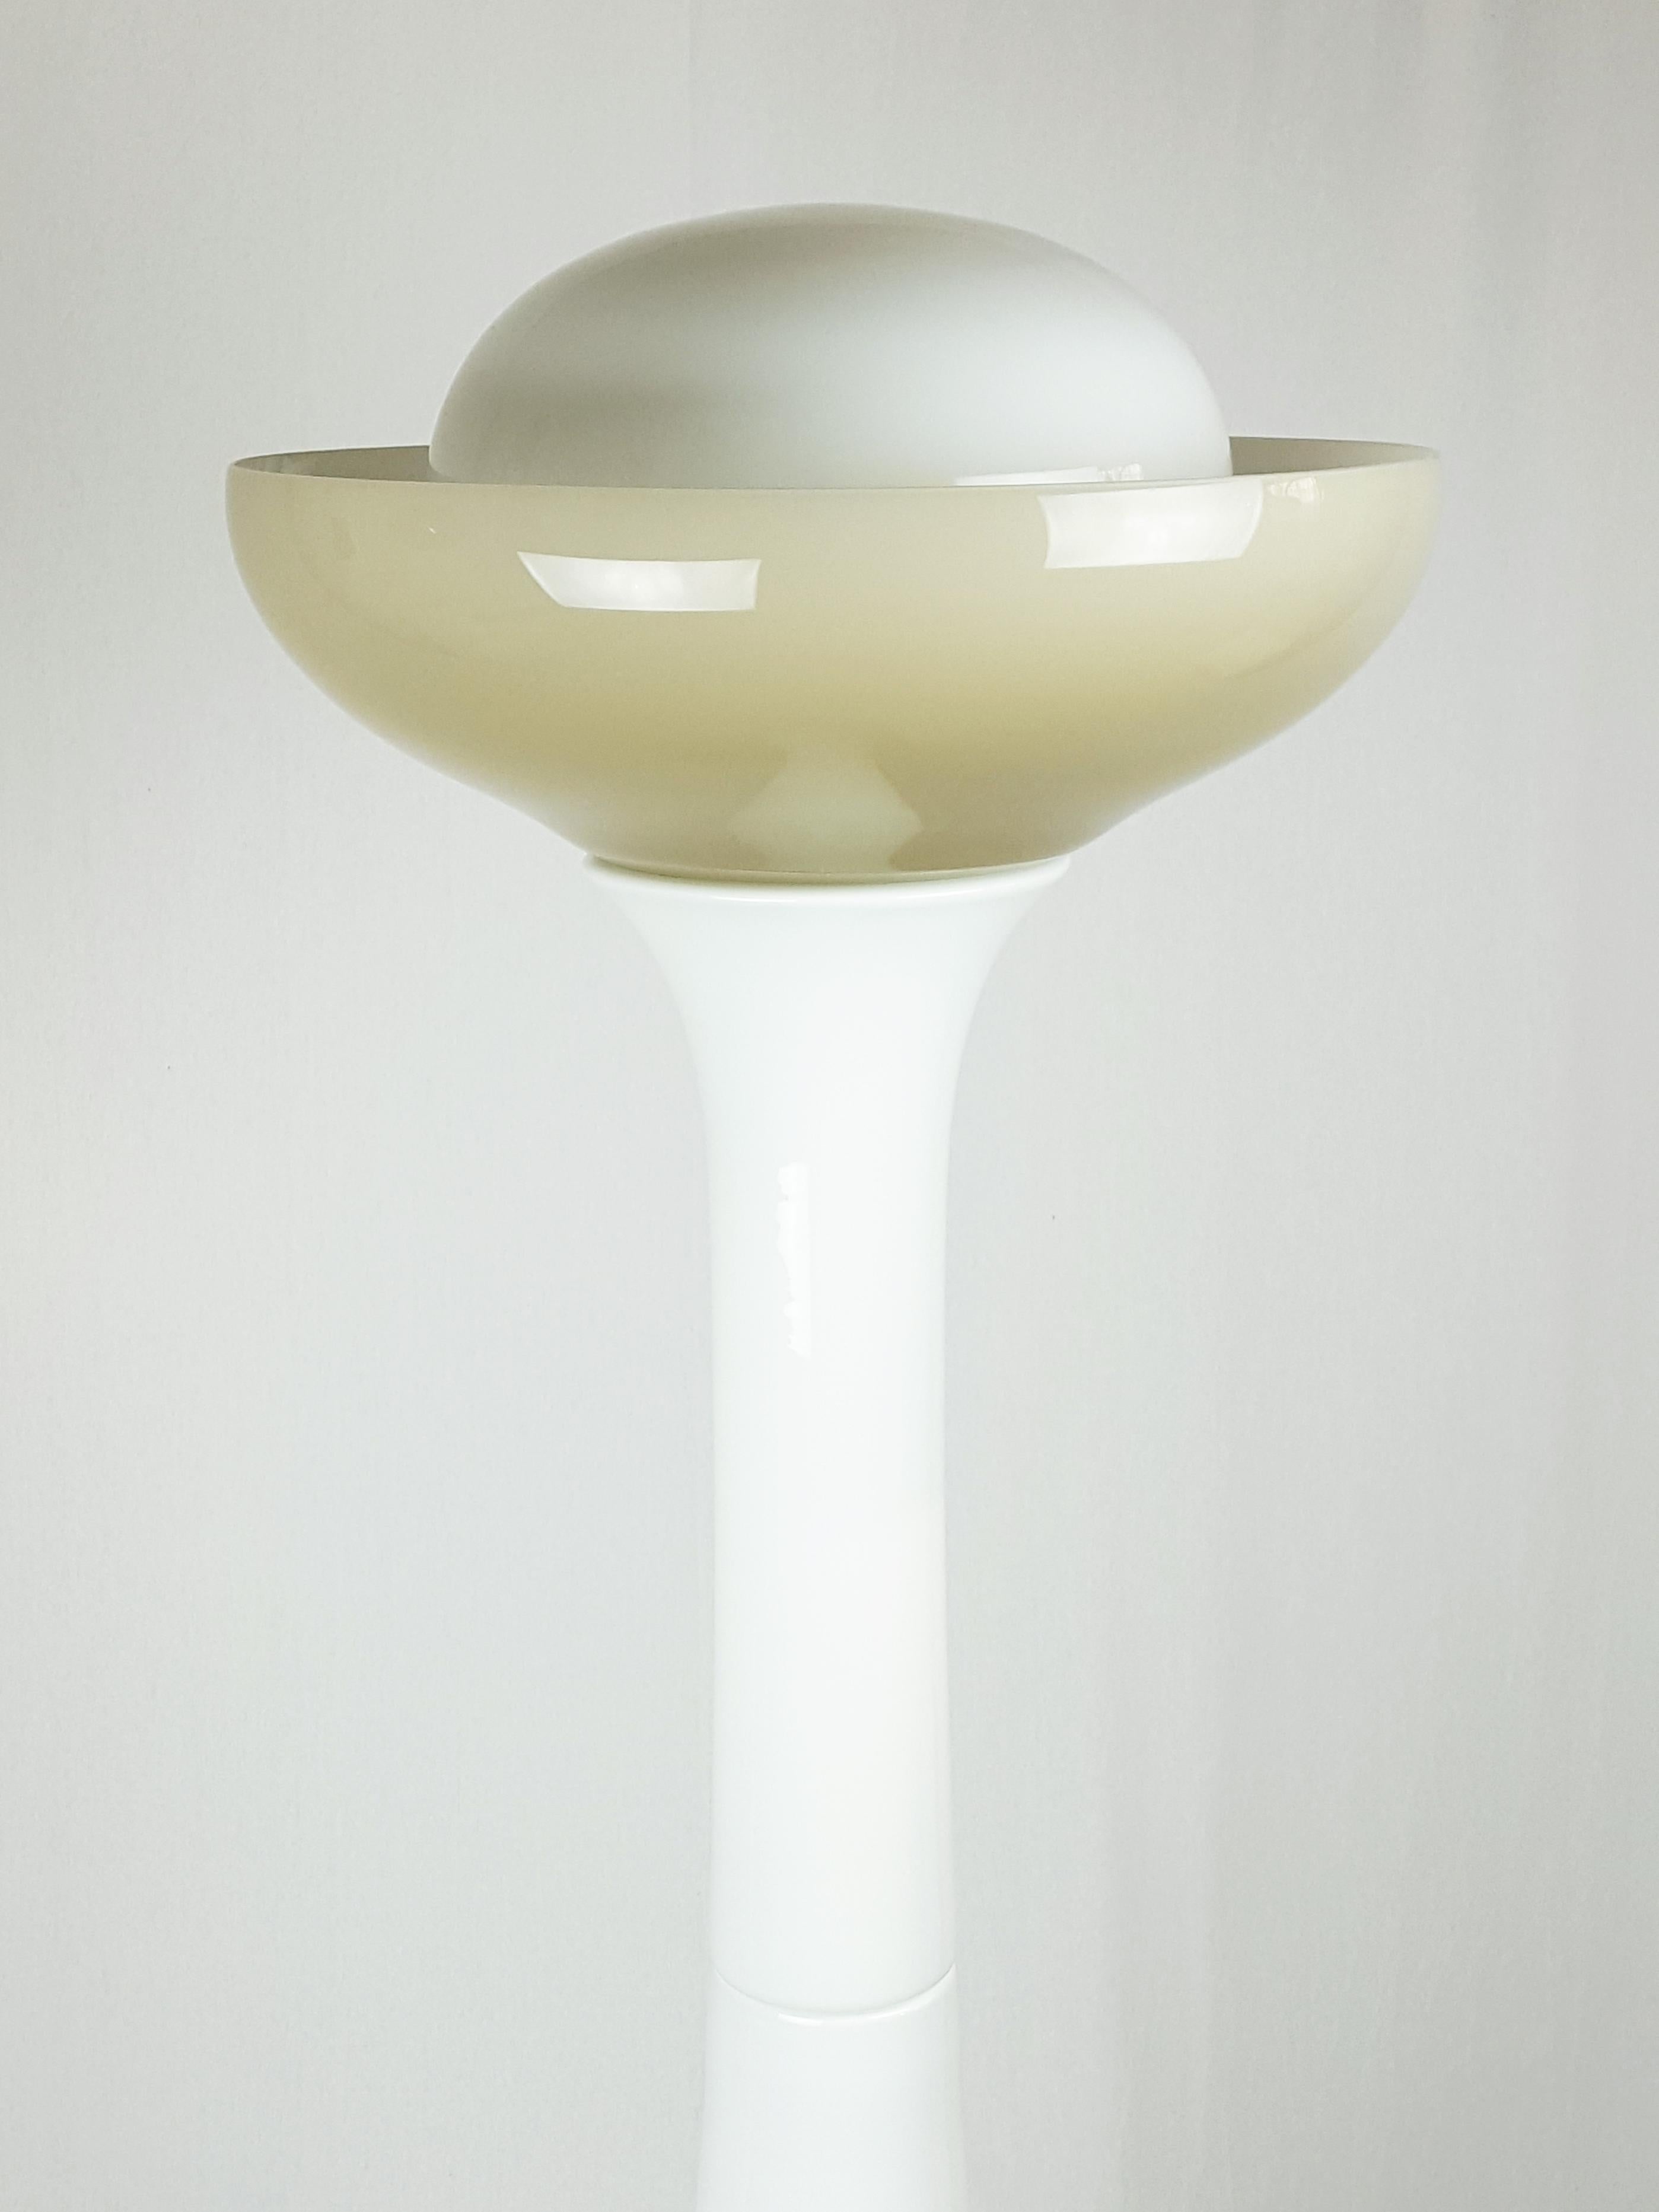 Space Age Olive Green and White Murano Glass Floor Lamp by Carlo Nason for Selenova, 1960s For Sale